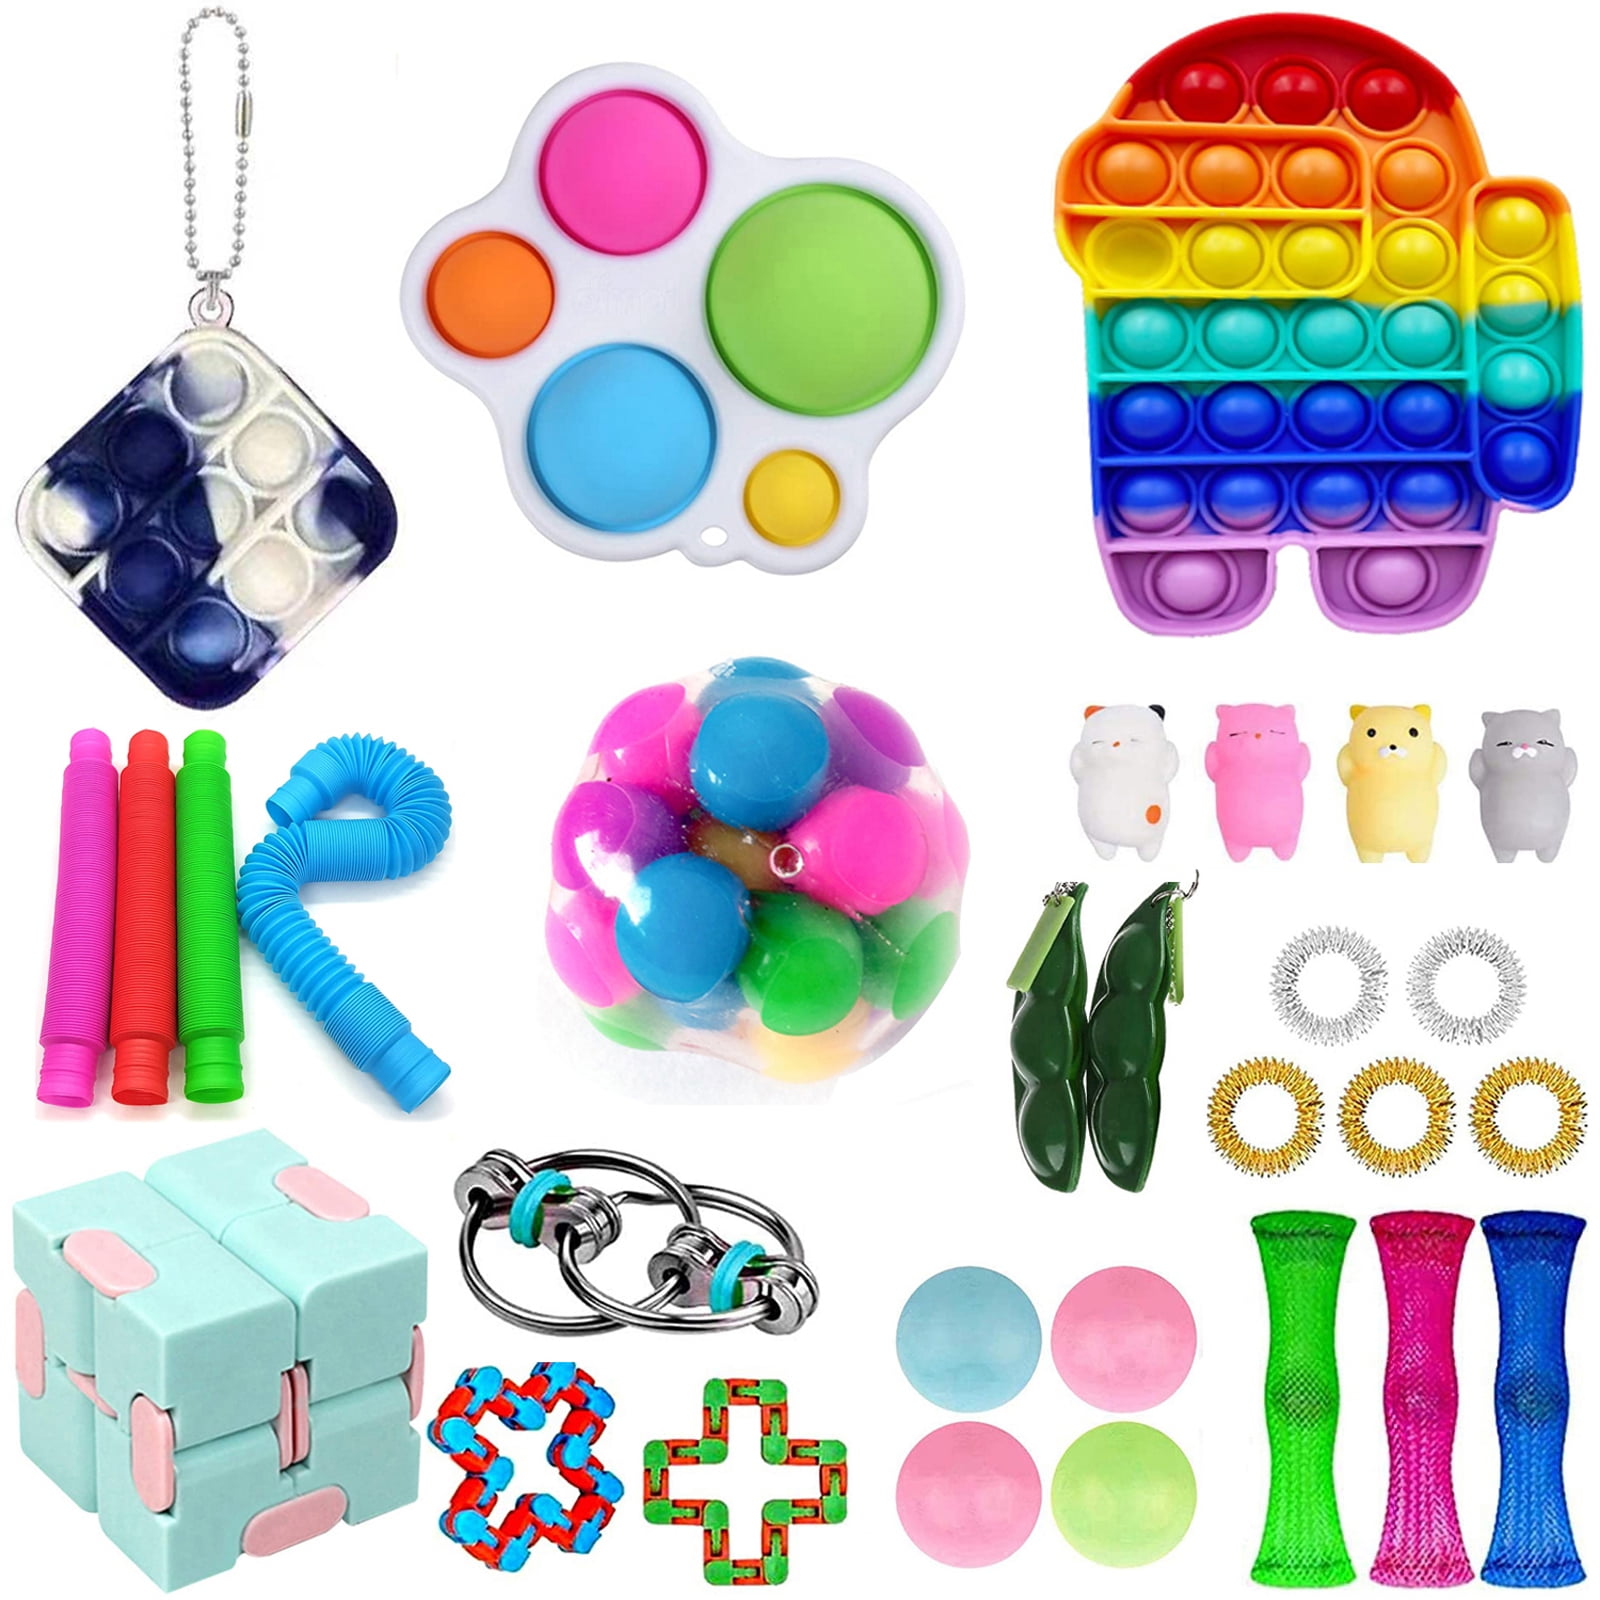 Details about   20-37PCS Pack Fidget Sensory Toy Set Stress Anxiety Relief Toys Pop Ships Free 